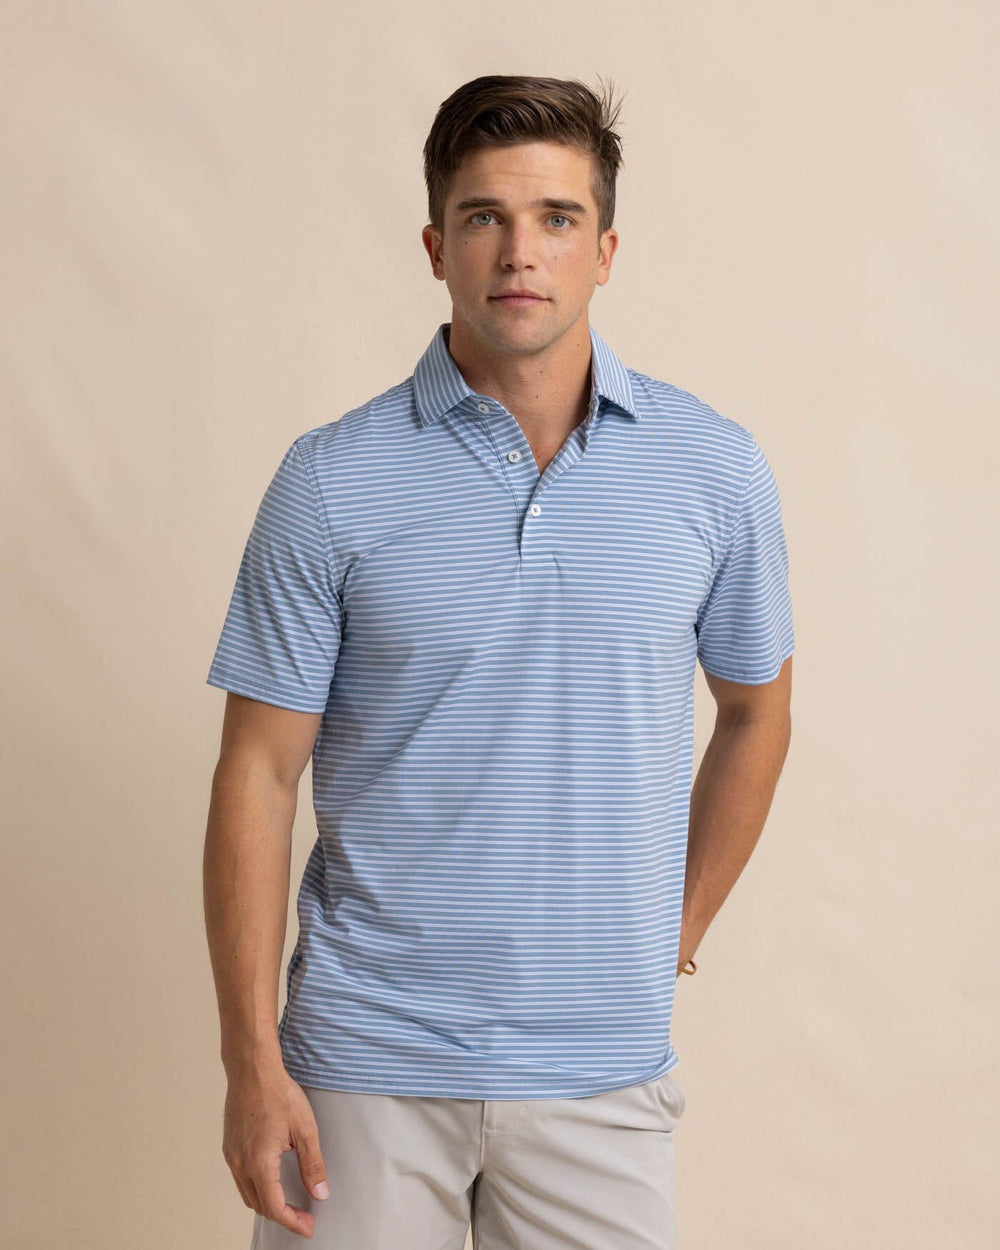 The front view of the Southern Tide brrr eeze Beattie Stripe Performance Polo by Southern Tide - Windward Blue